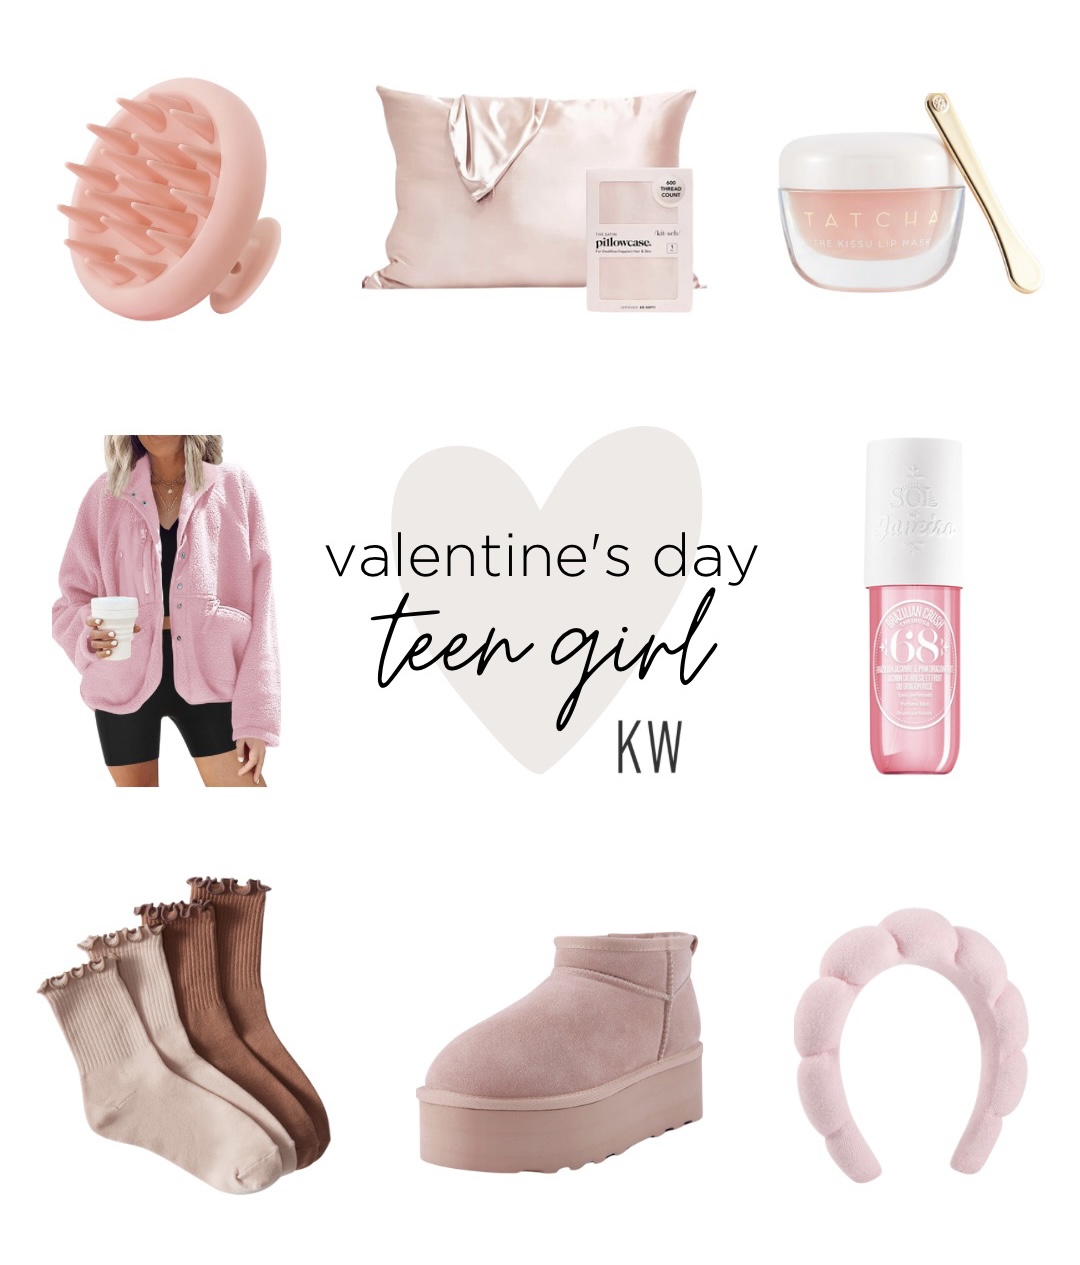 Valentine's Gifts for Teen Girls